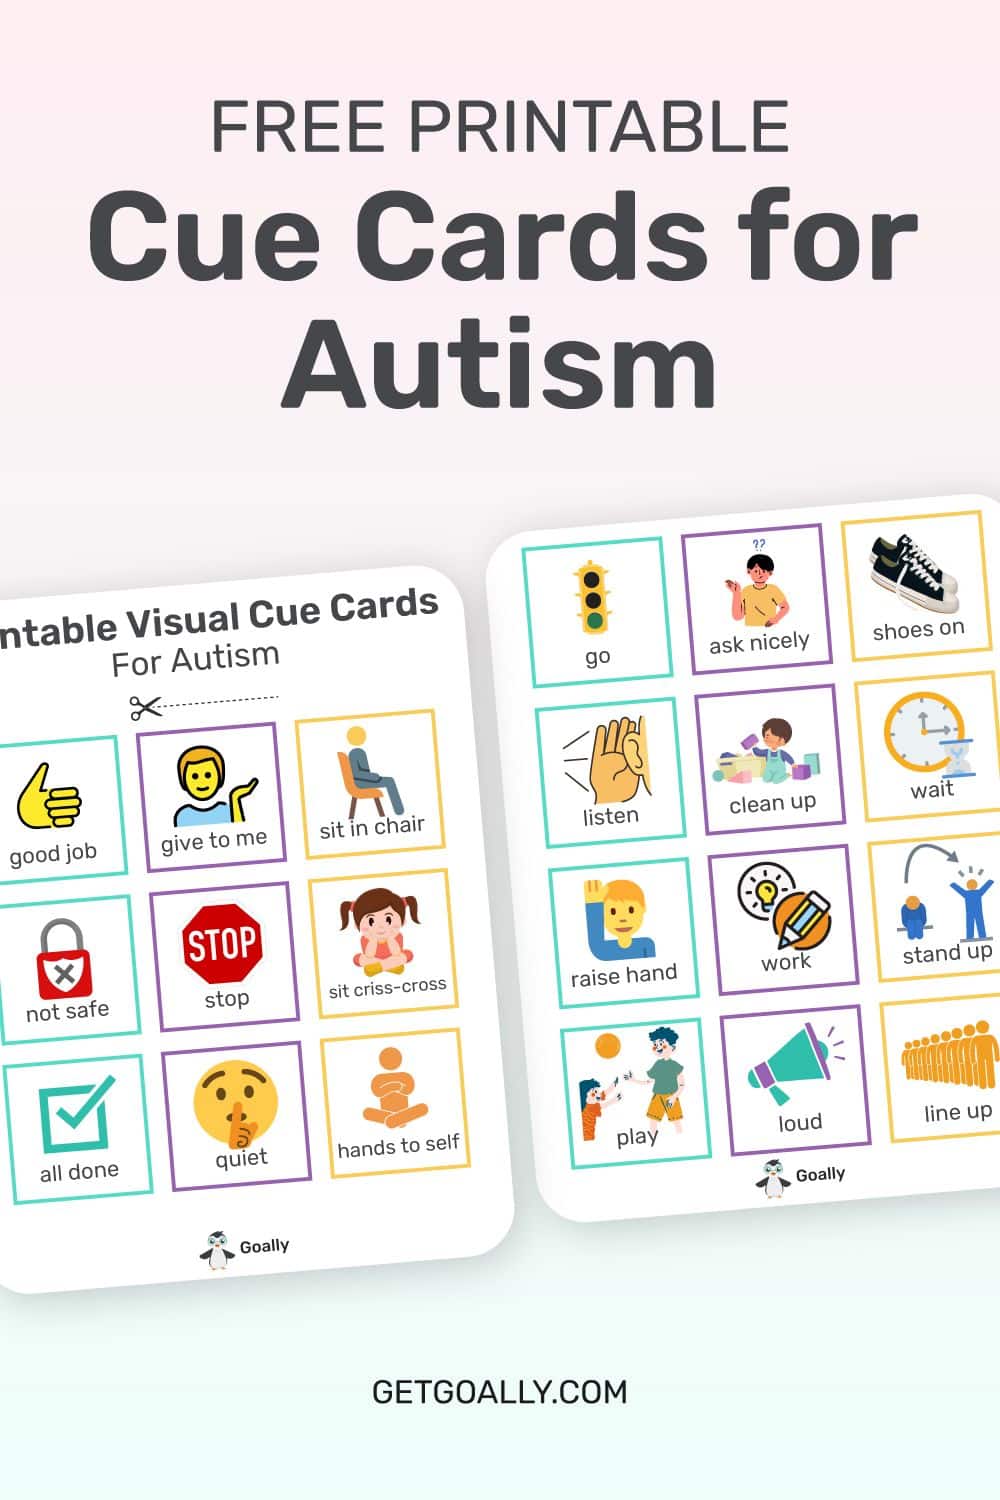 free-printable-visual-cue-cards-for-autism-printable-templates-free